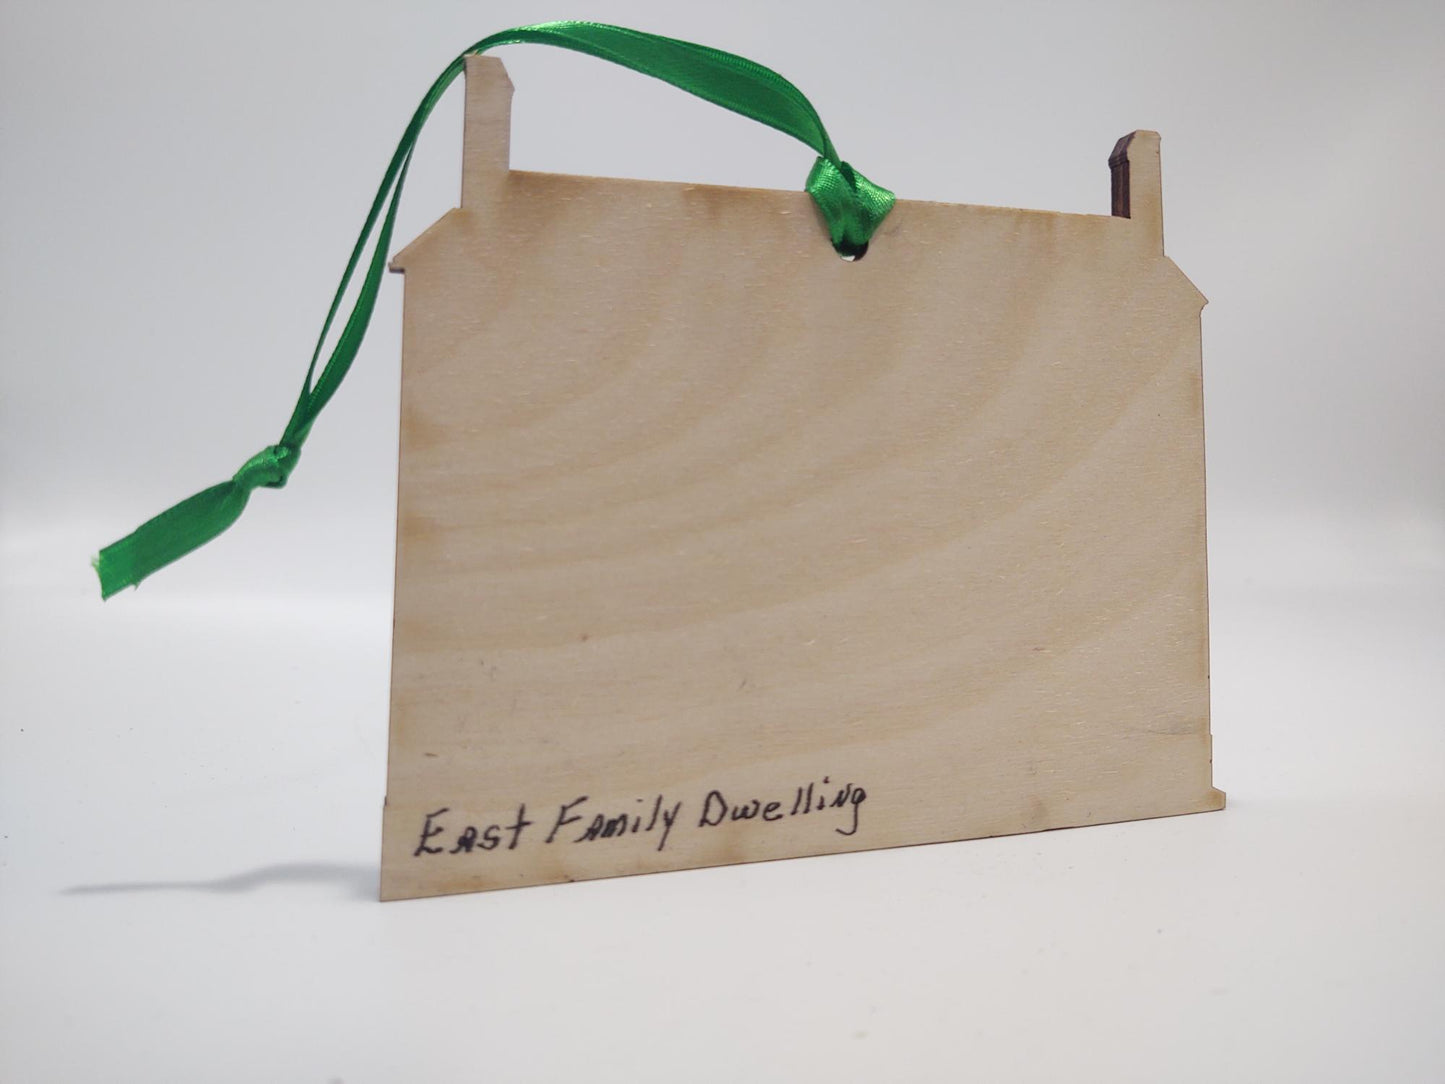 Christmas Ornament - East Family Dwelling, Shaker Village Building